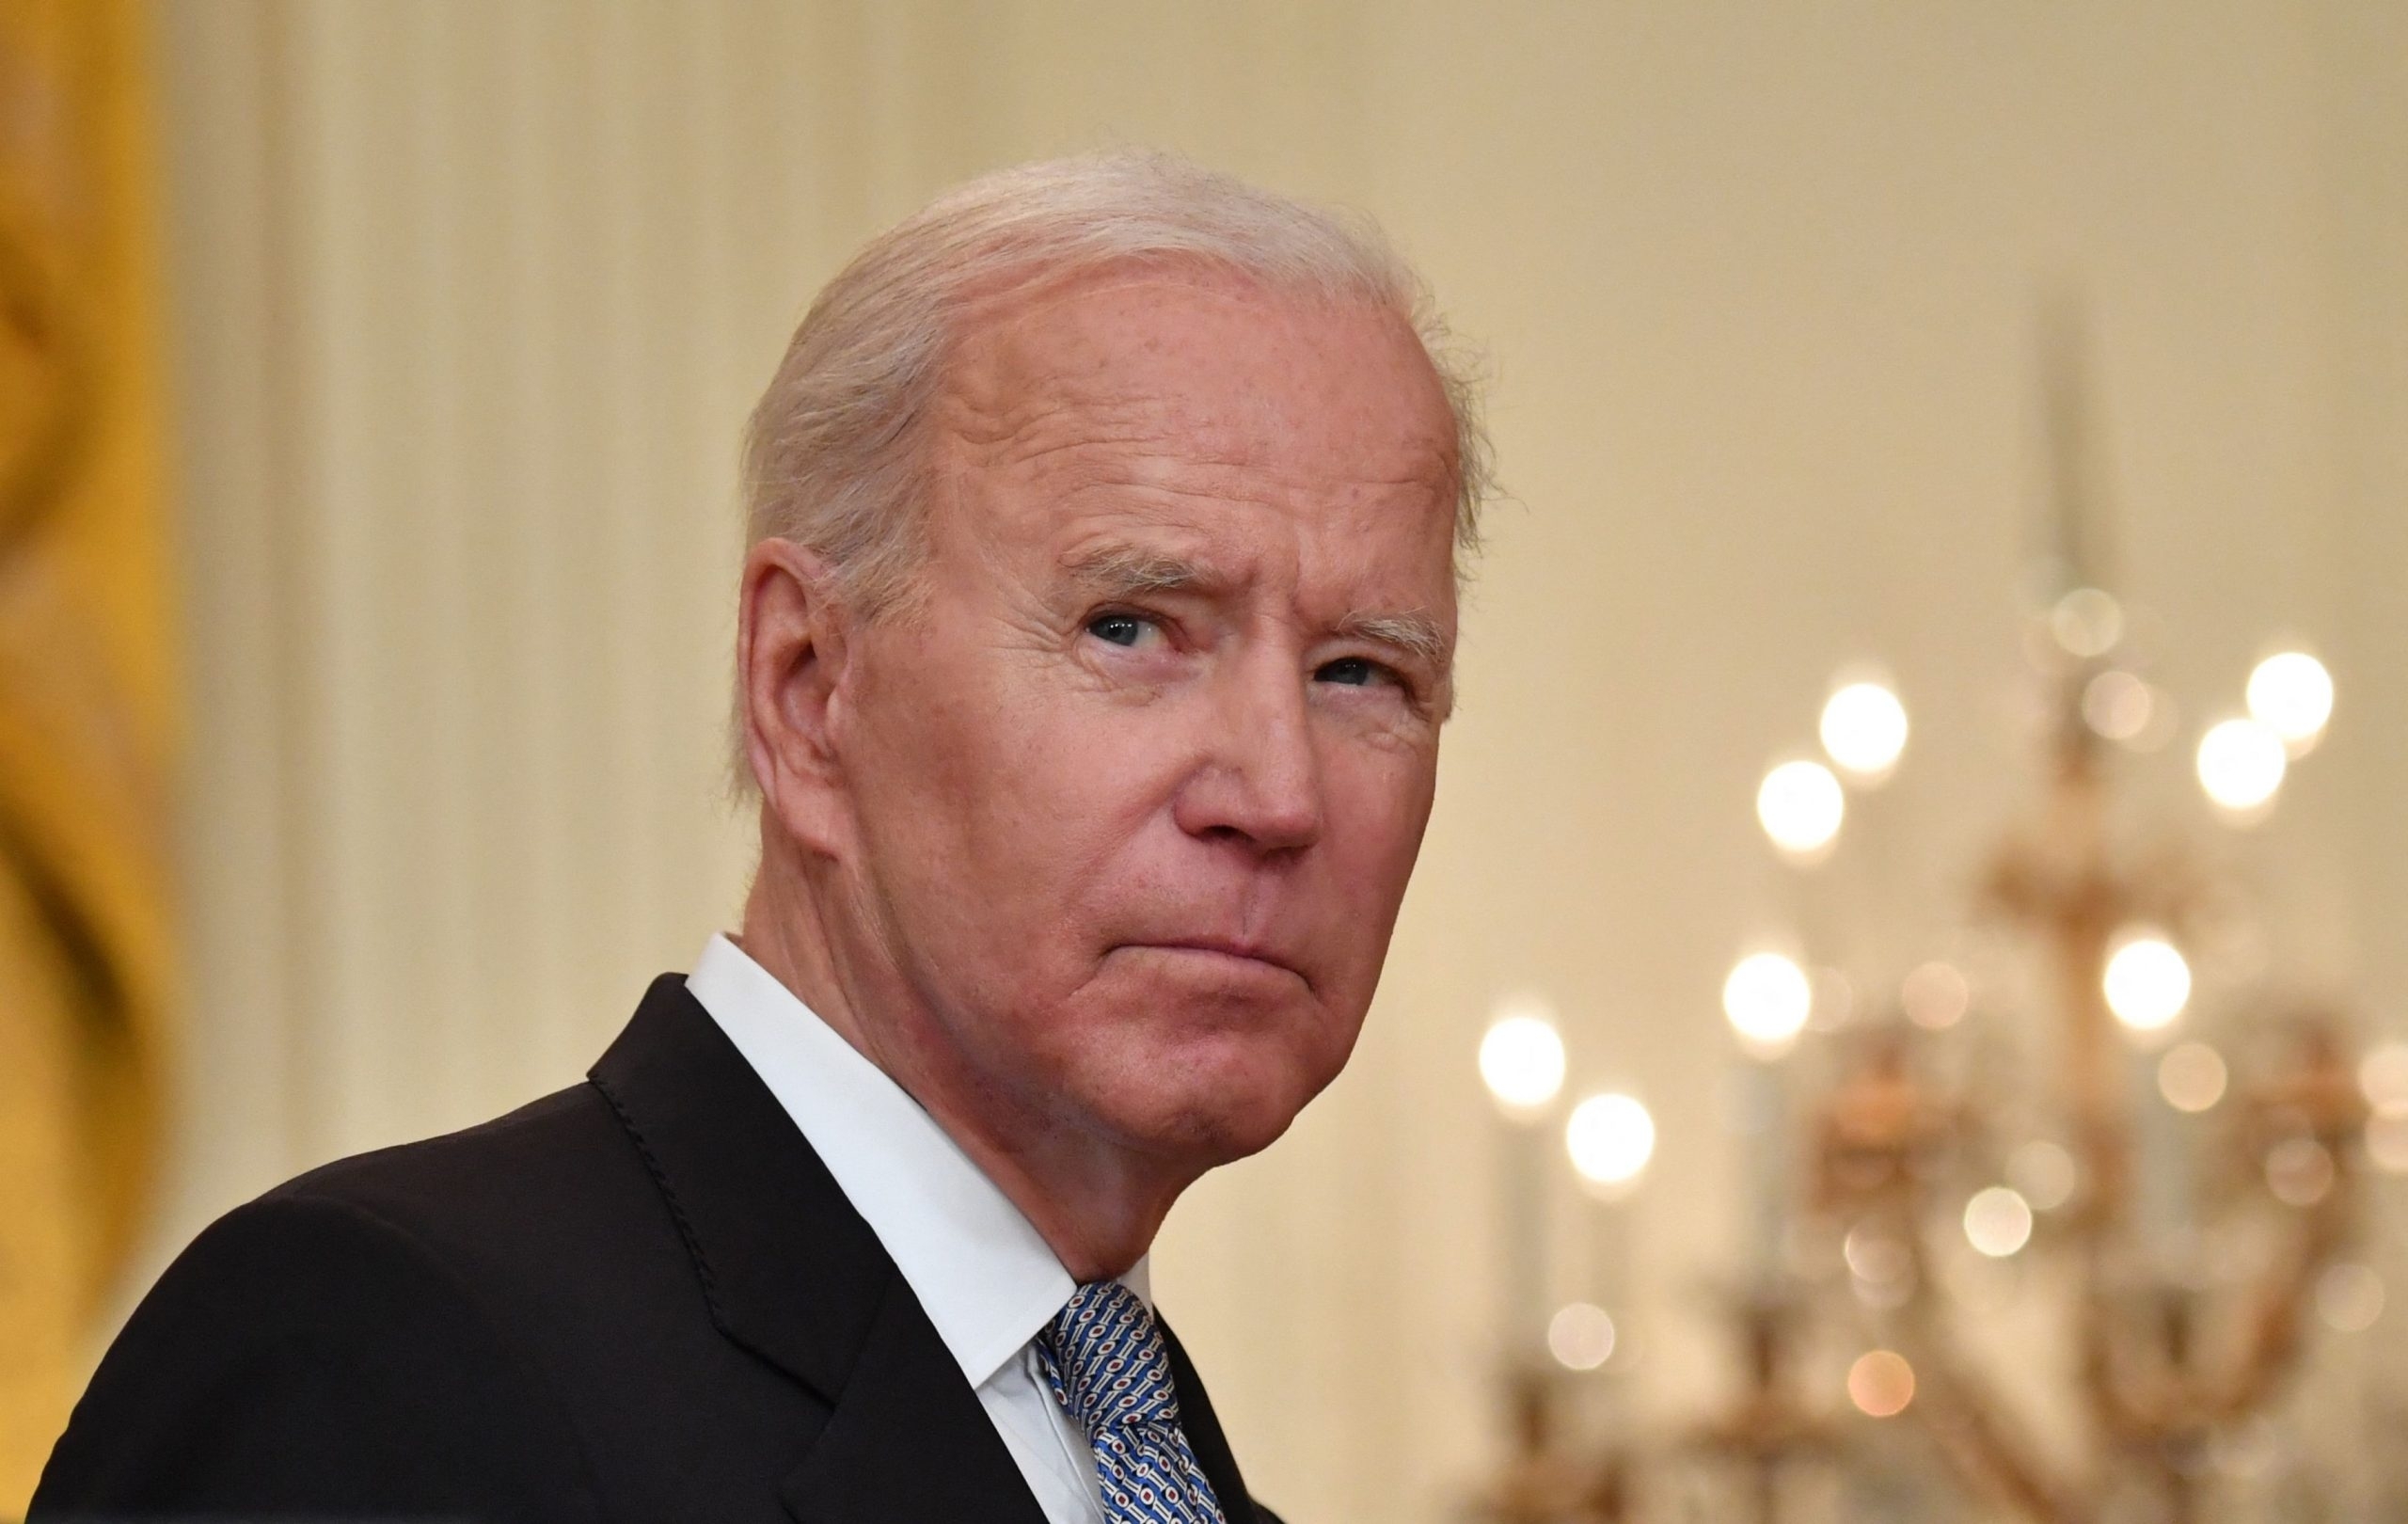 ‘Pipe bombs’ recovered in Northern Ireland ahead of US President Biden´s visit  